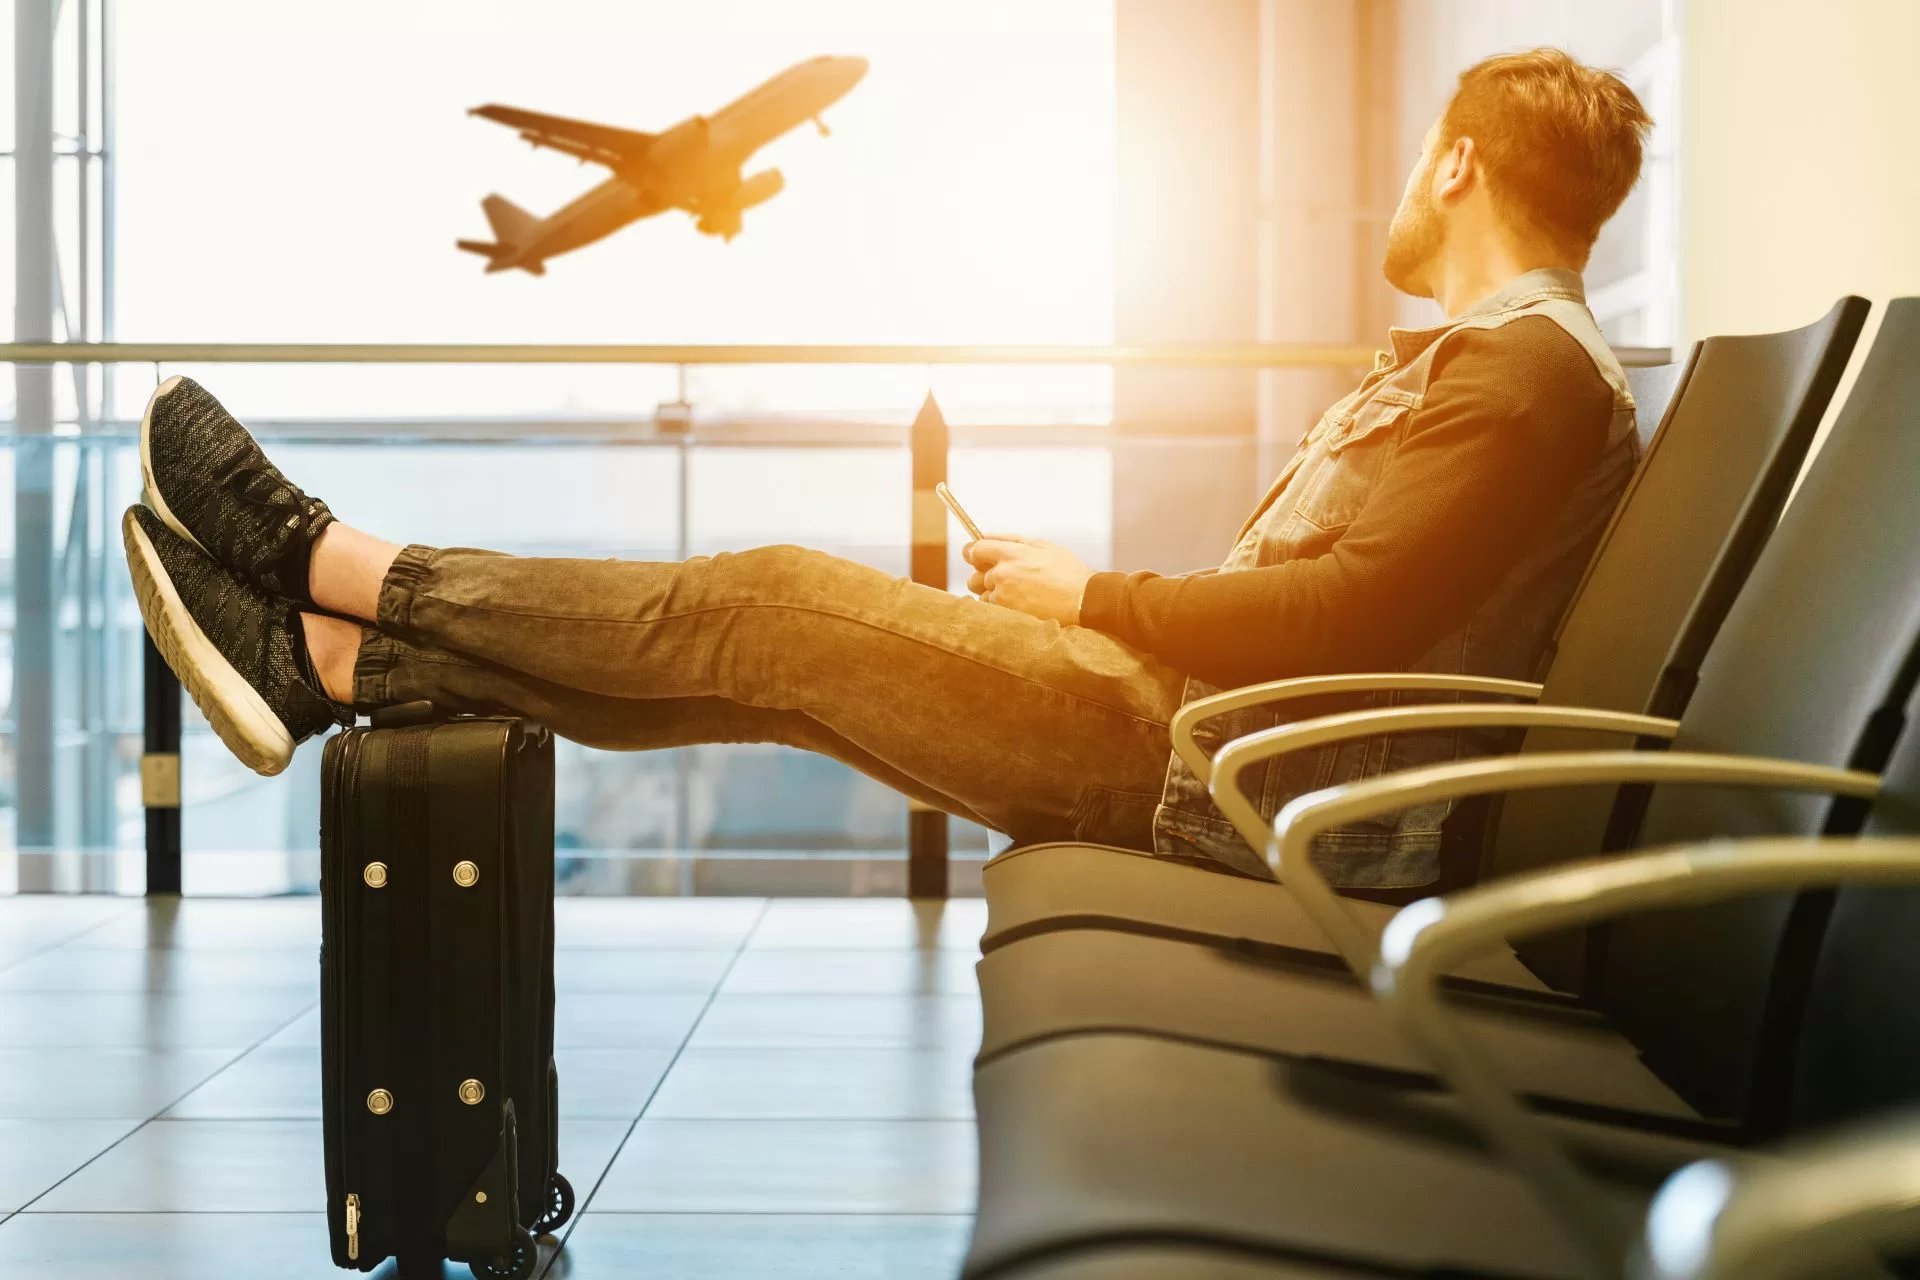 How to Turn Long Airport Waits into an Adventure